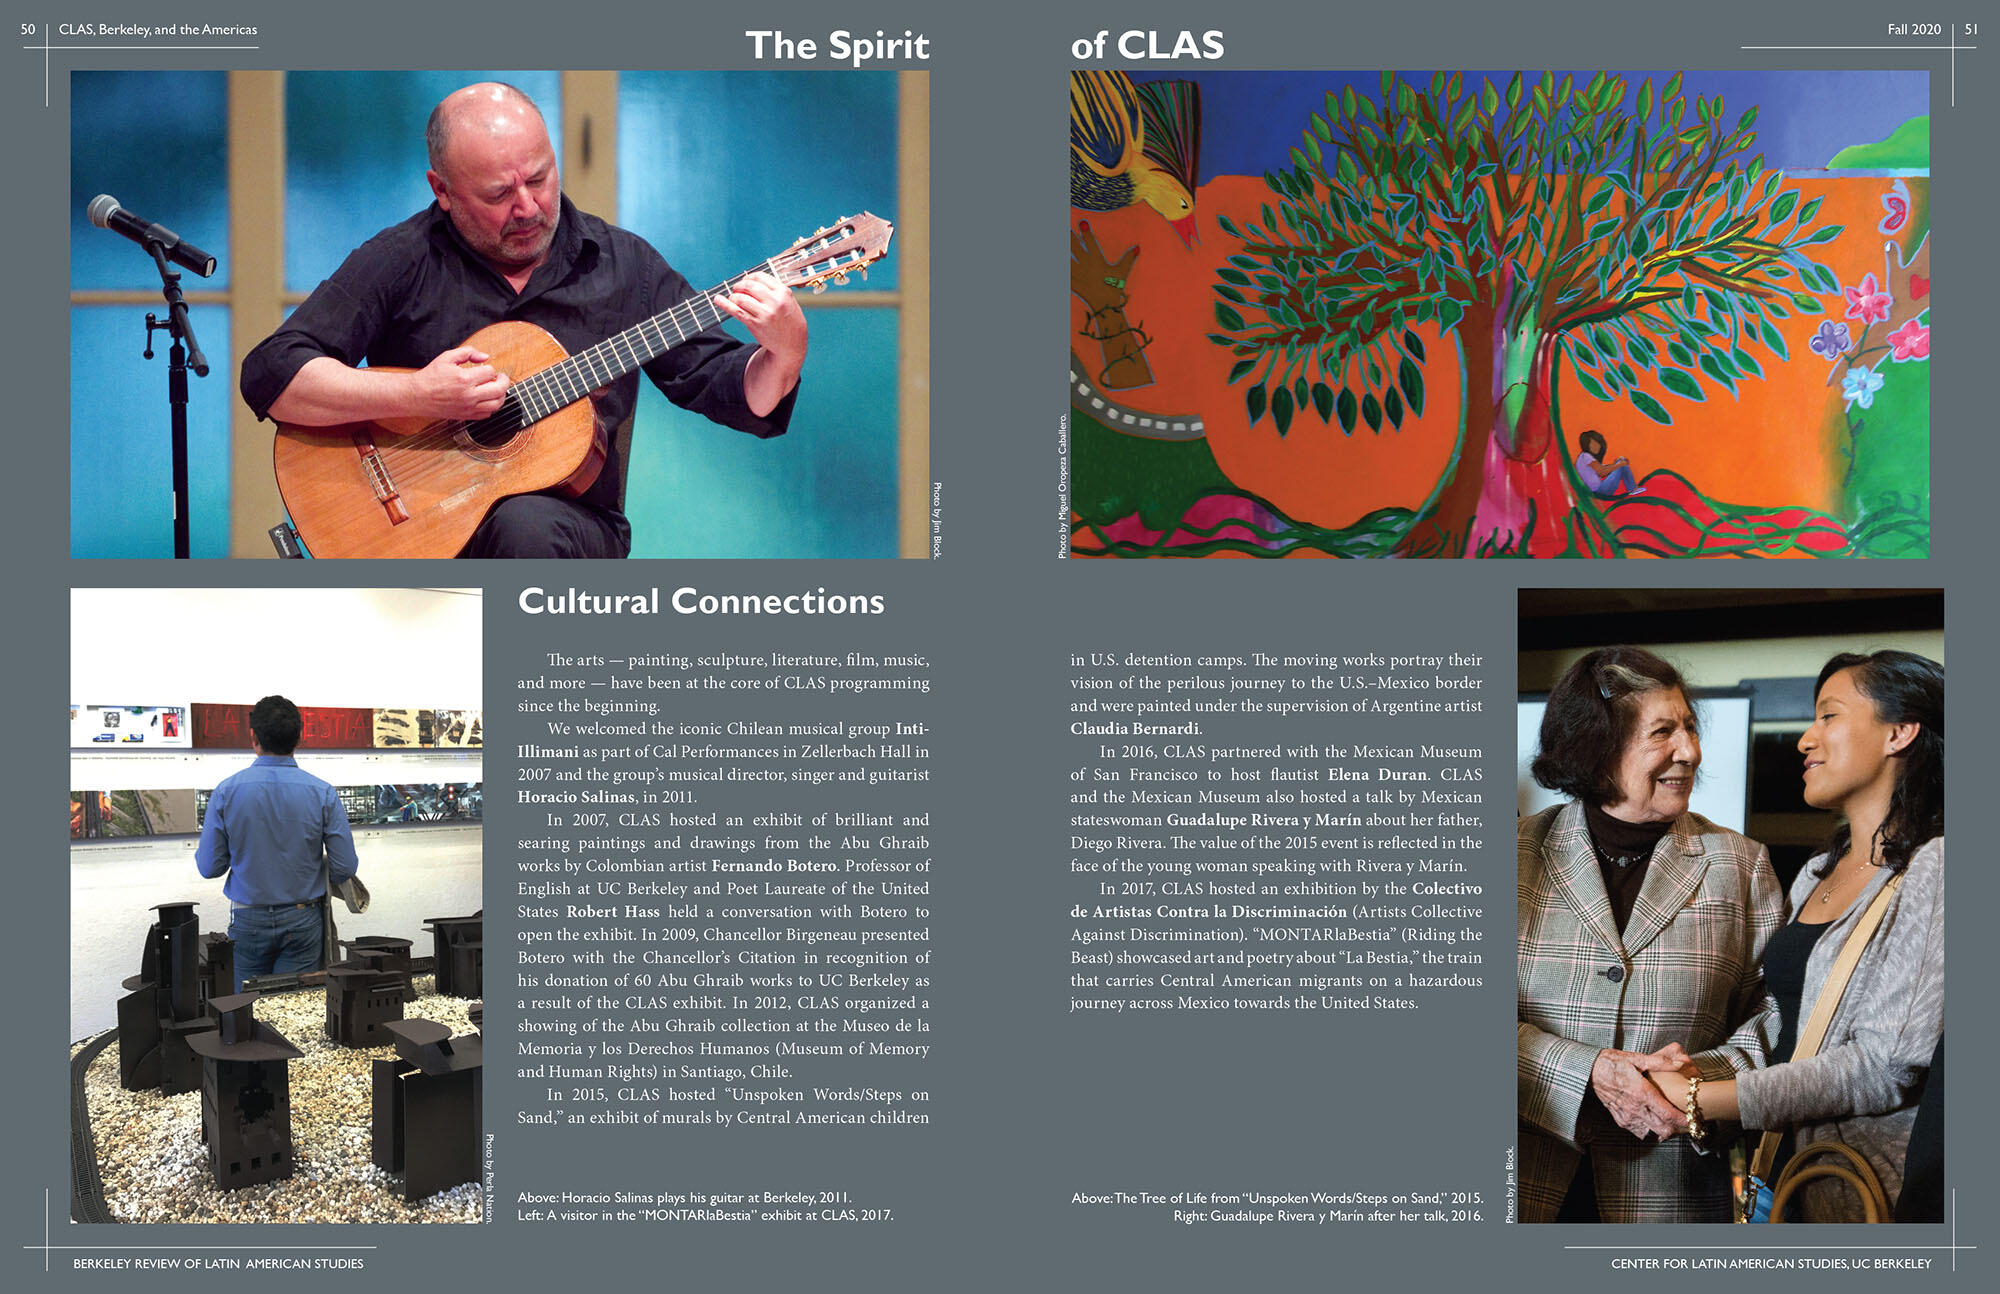 Two pages dedicated to cultural connections at CLAS, including Horacio Salinas, Guadelupe Rivera y Marin, connections with The Mexican Museum of San Francisco, and Claudia Bernardi. (Image from CLAS.)